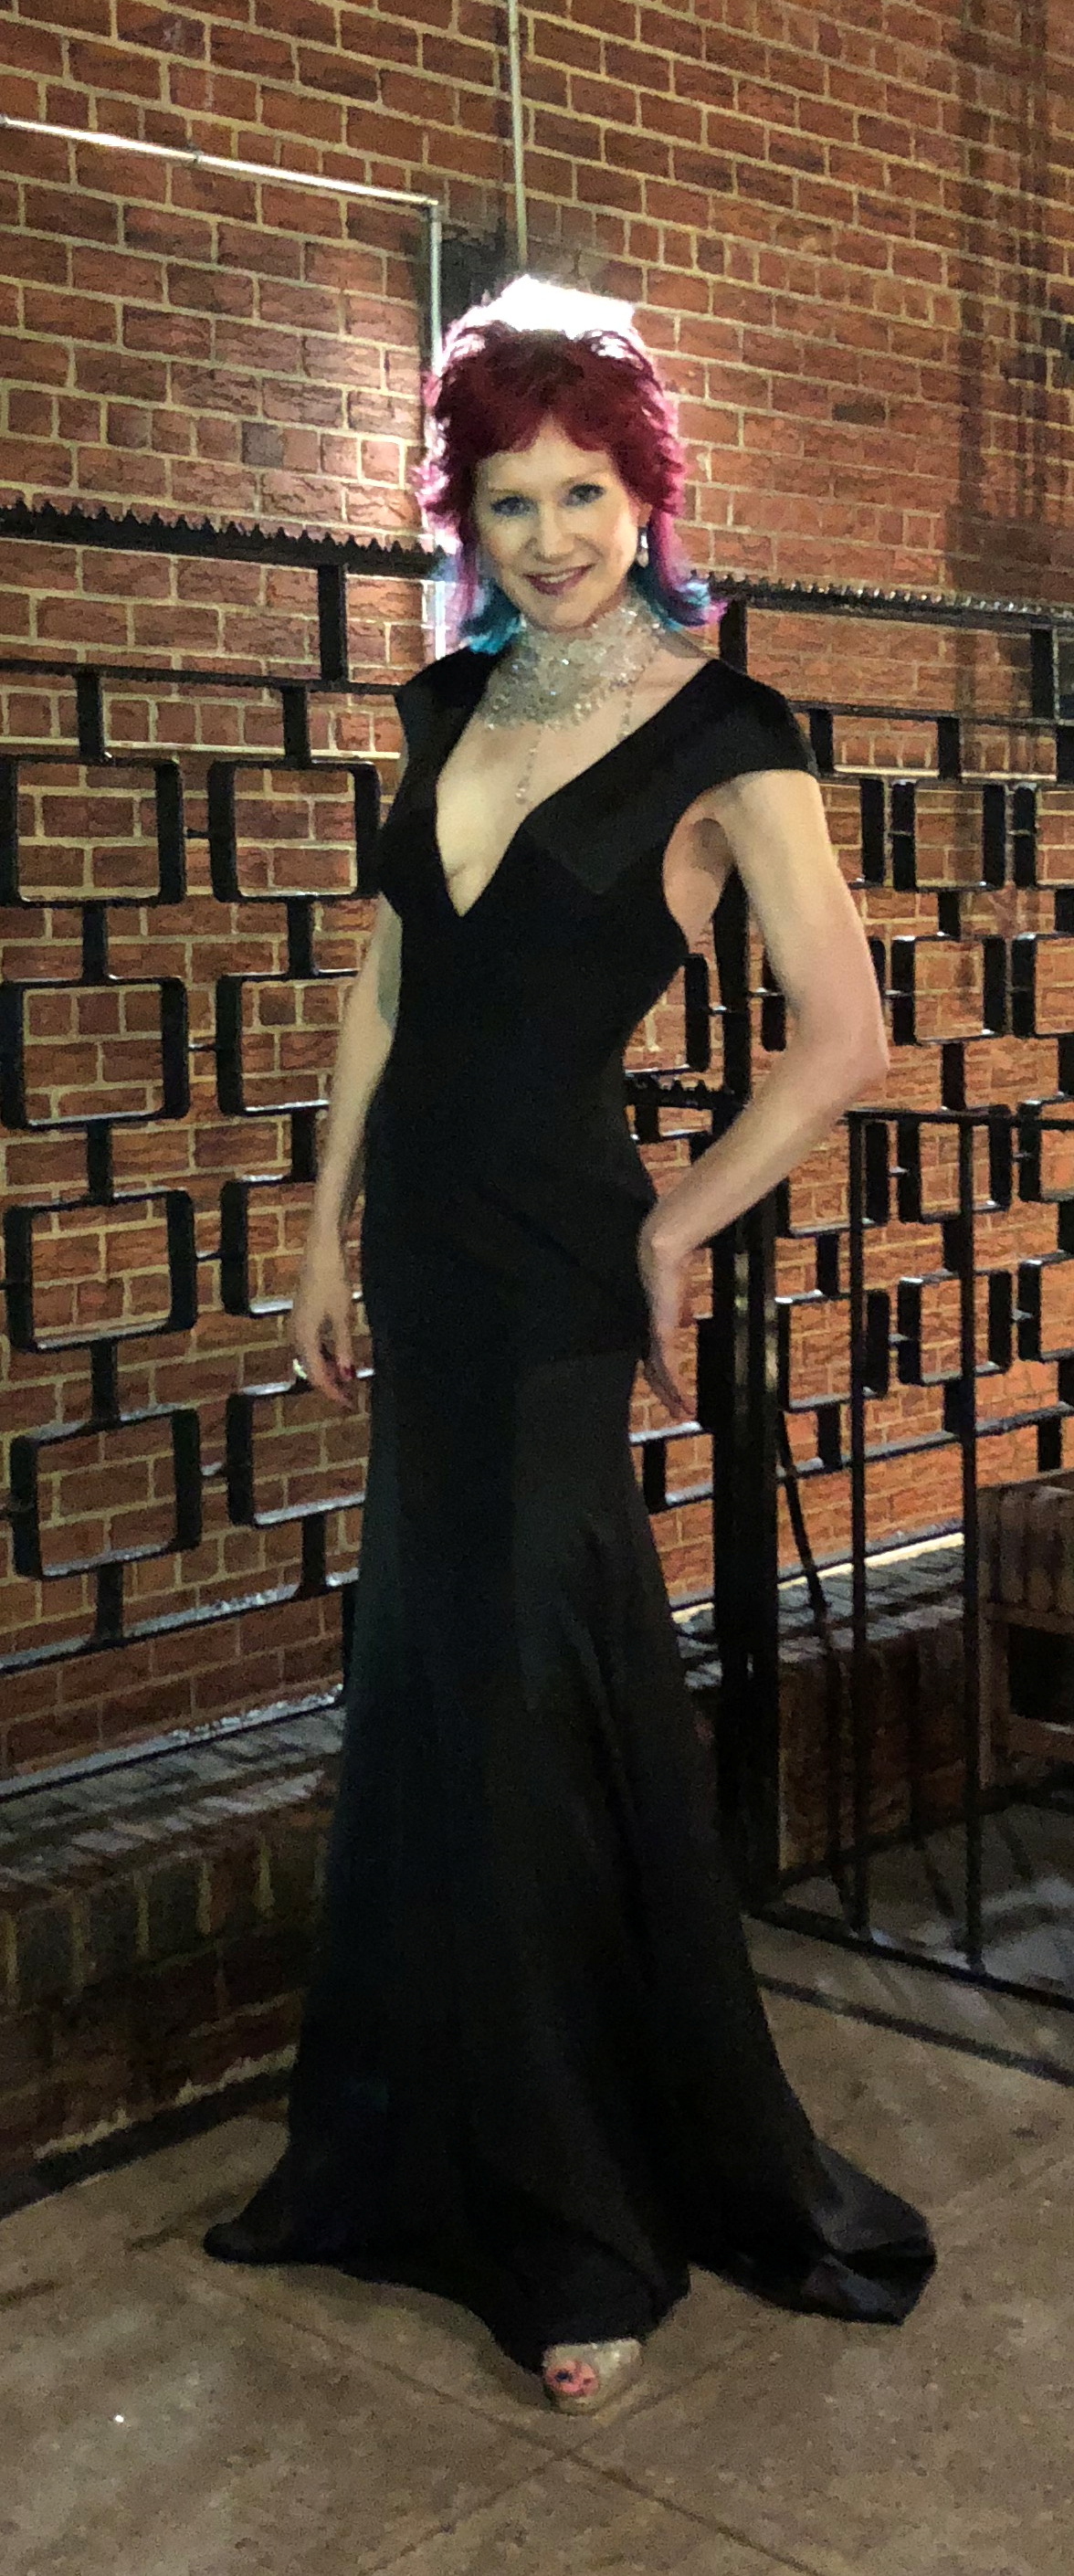 Karen's Quirky Style - West Village Model Karen Rempel in gown by Engineered by Andrea T